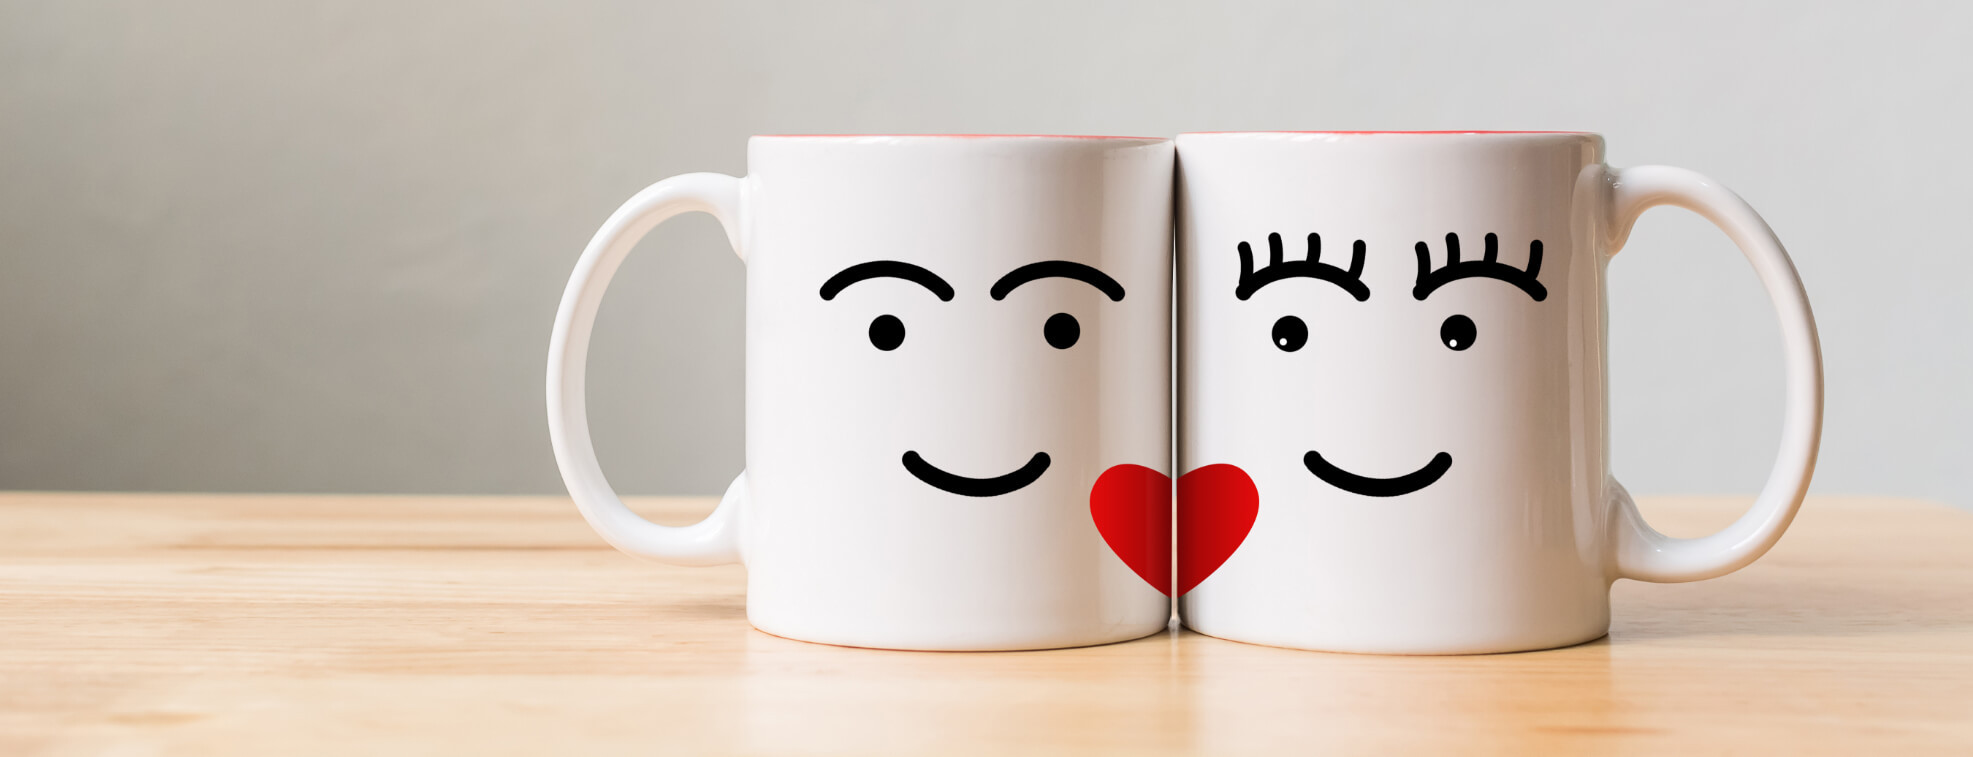 Valentines Day Ideas For Couples
 14 Meaningful Valentine’s Day Gift Ideas for Her and Him